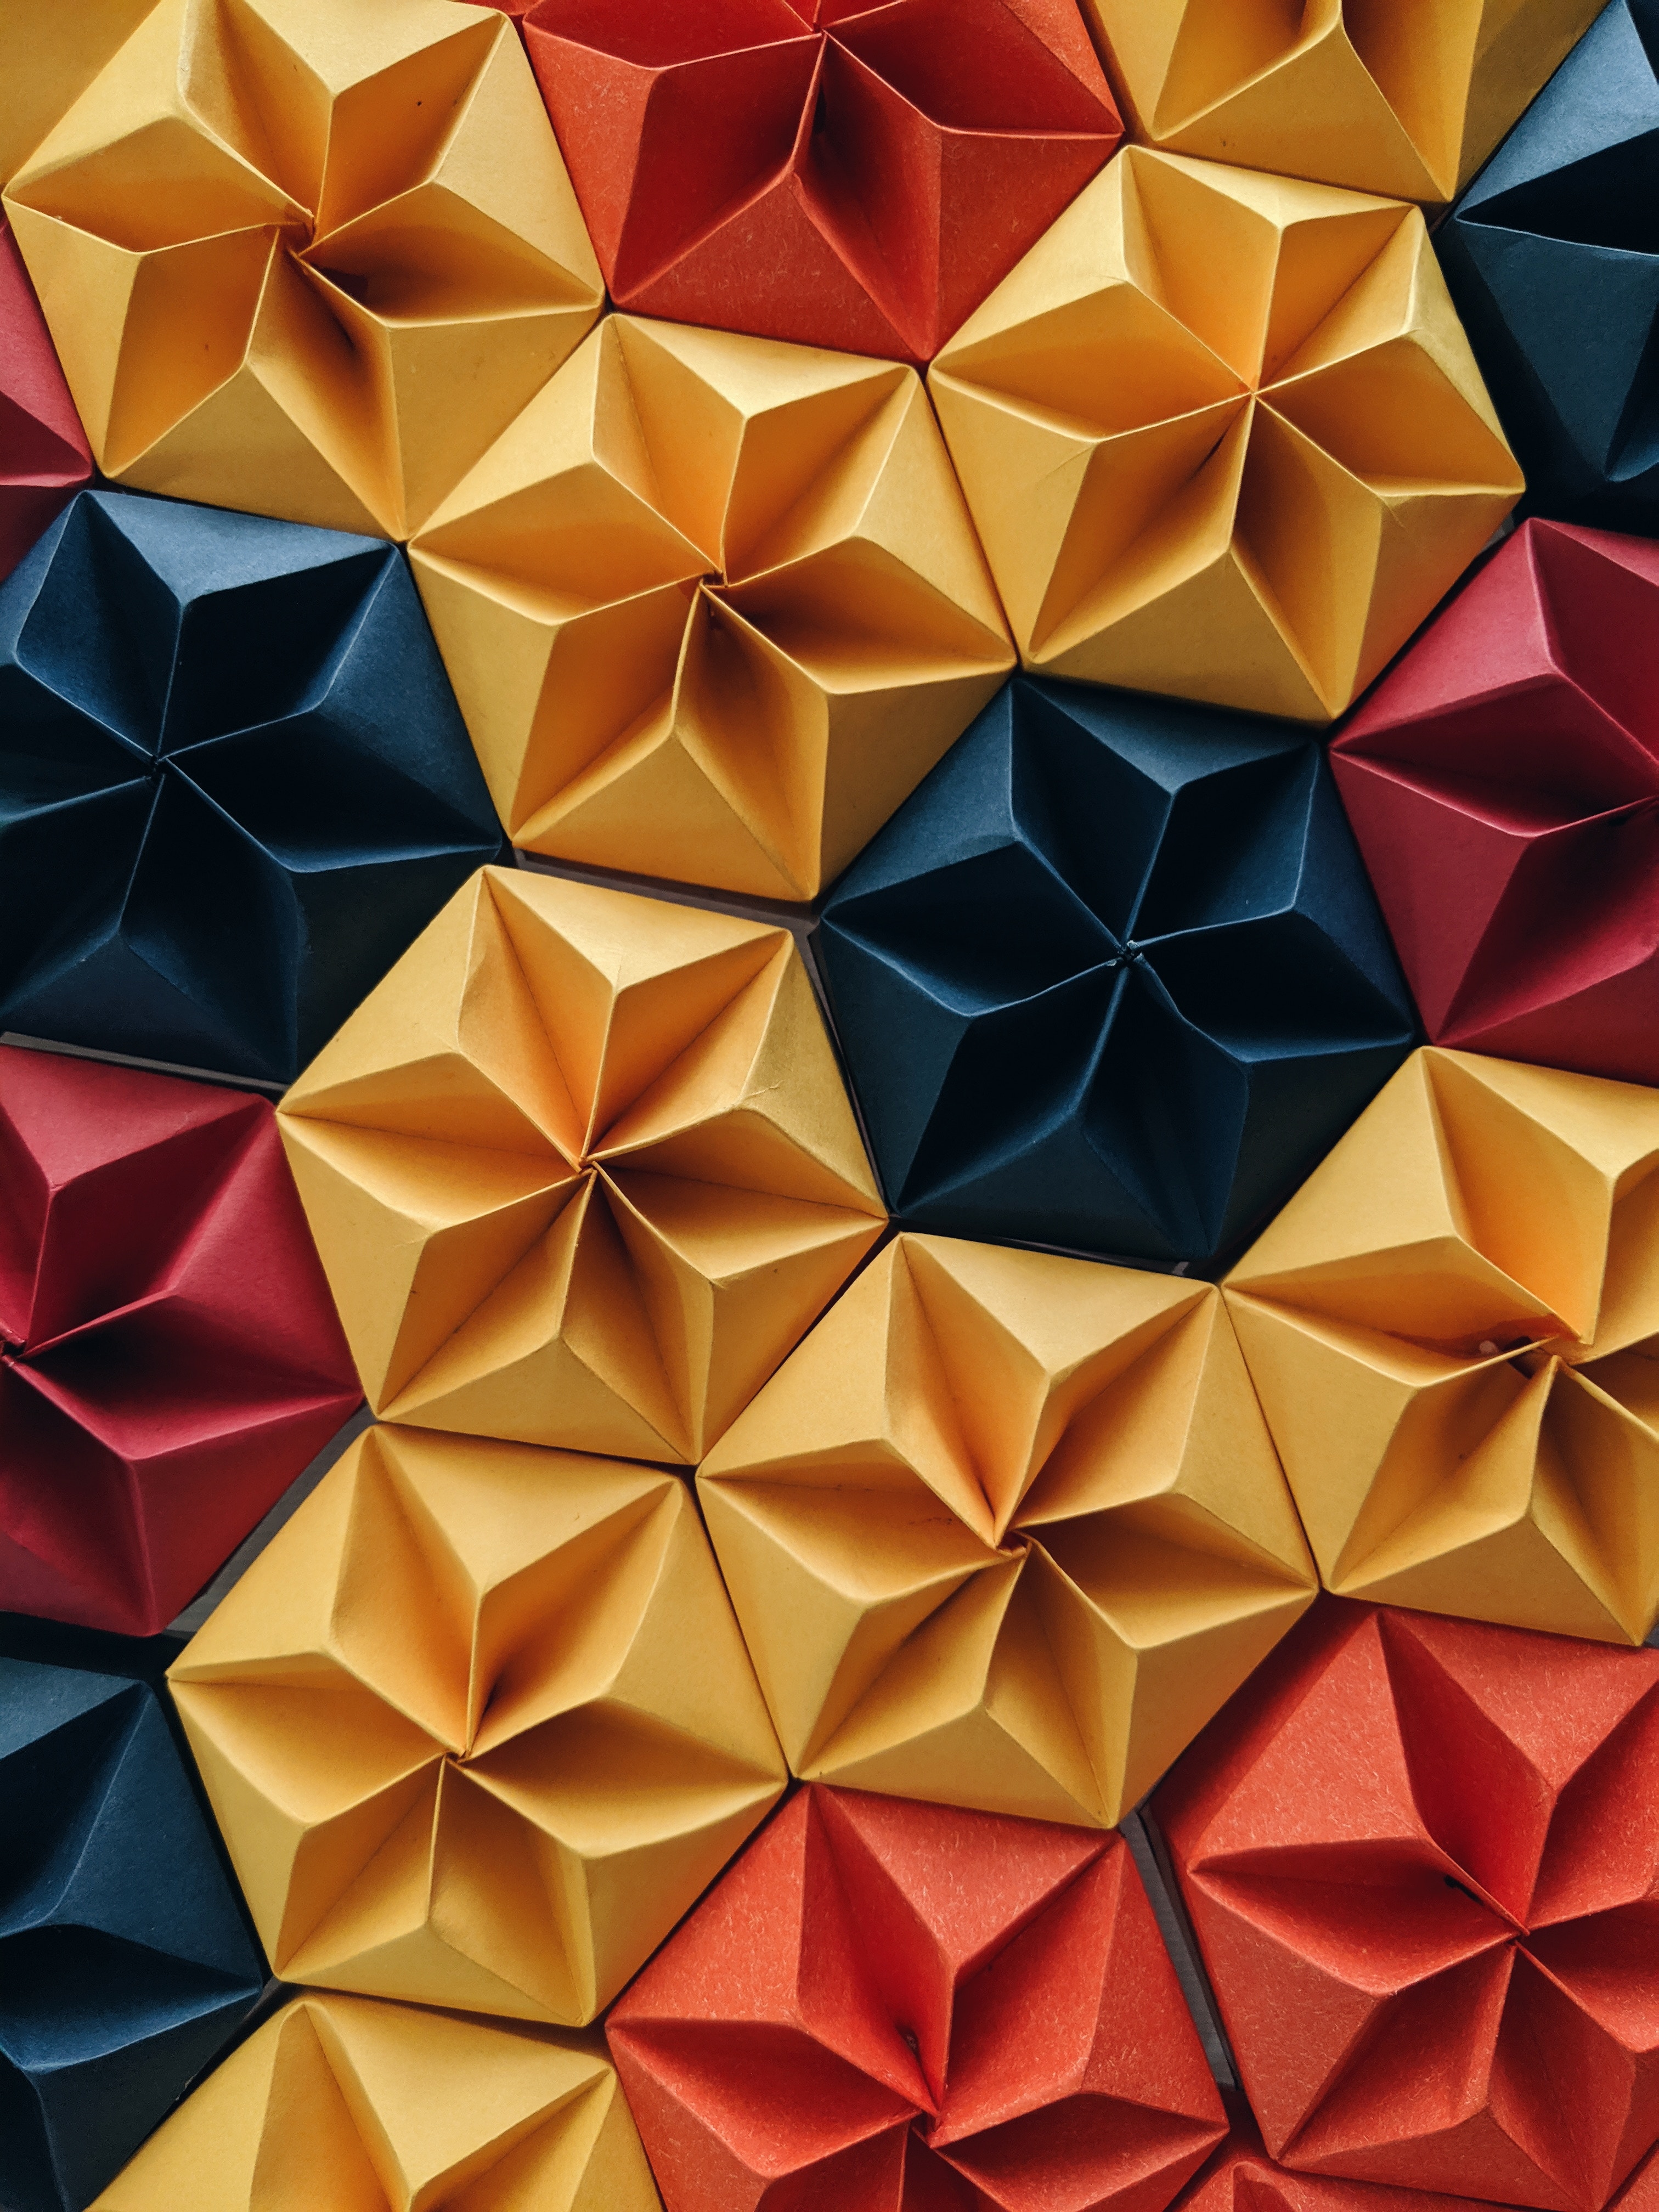 multicolored, motley, texture, textures, shape, shapes, paper, origami 4K